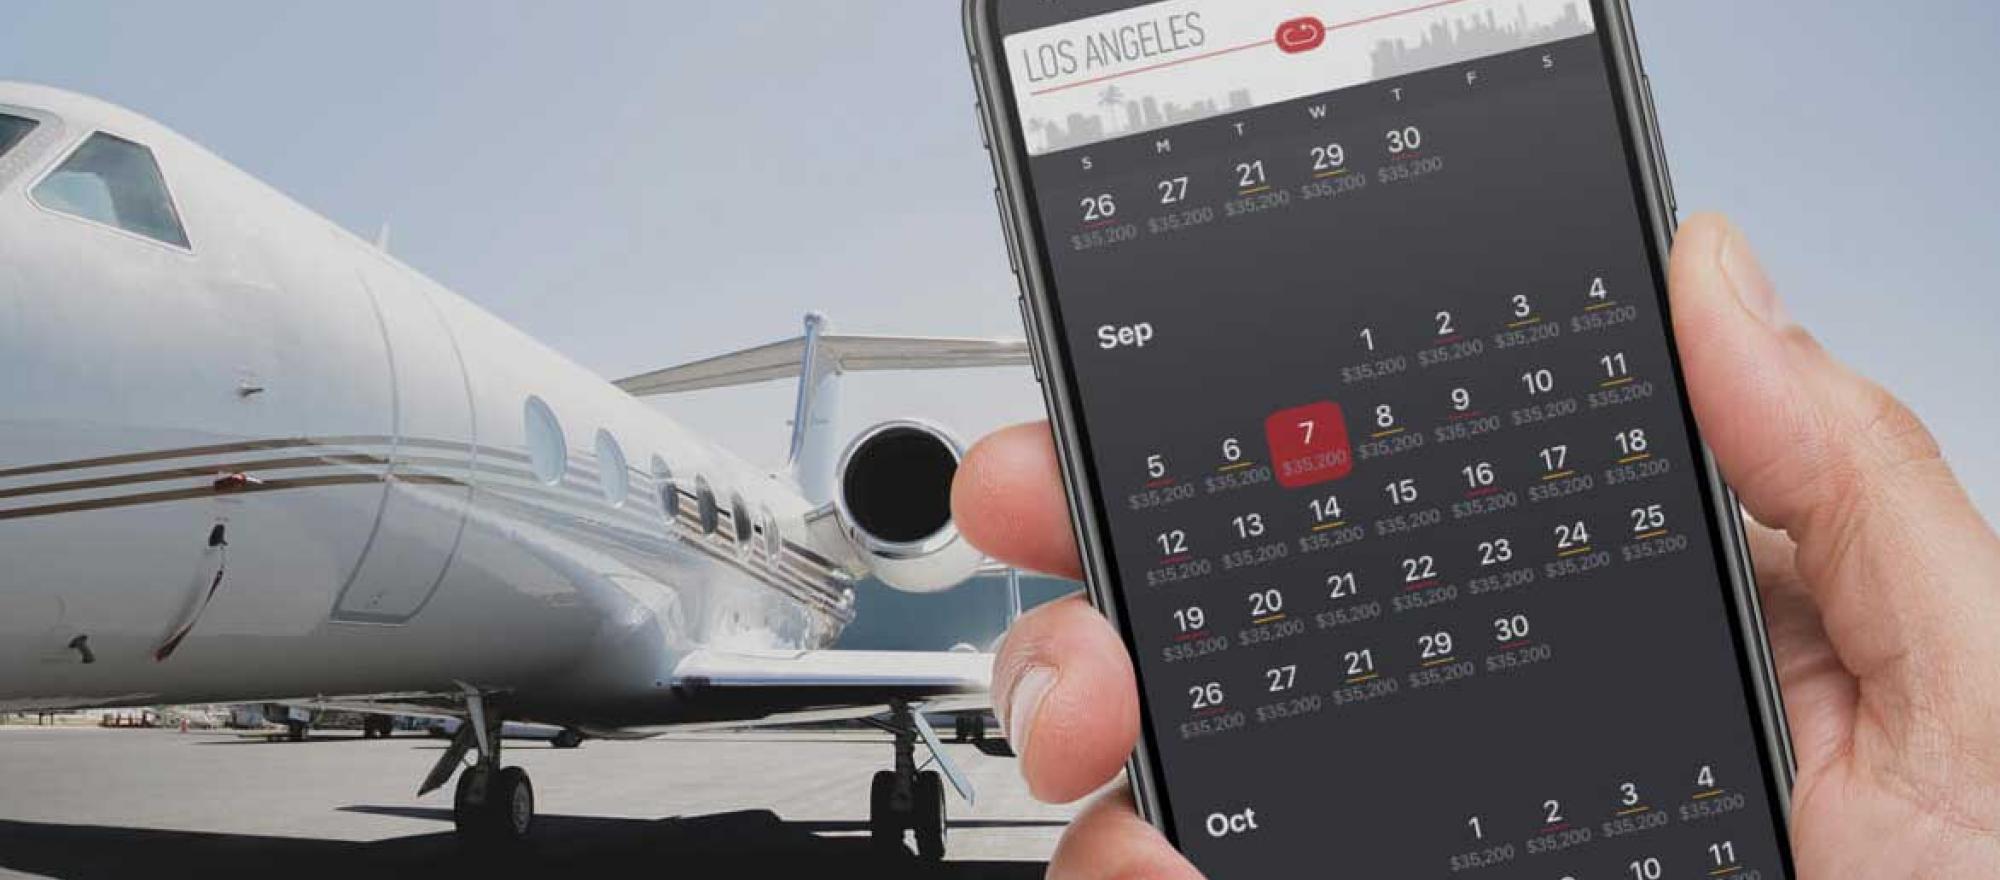 Xo aircraft with booking app